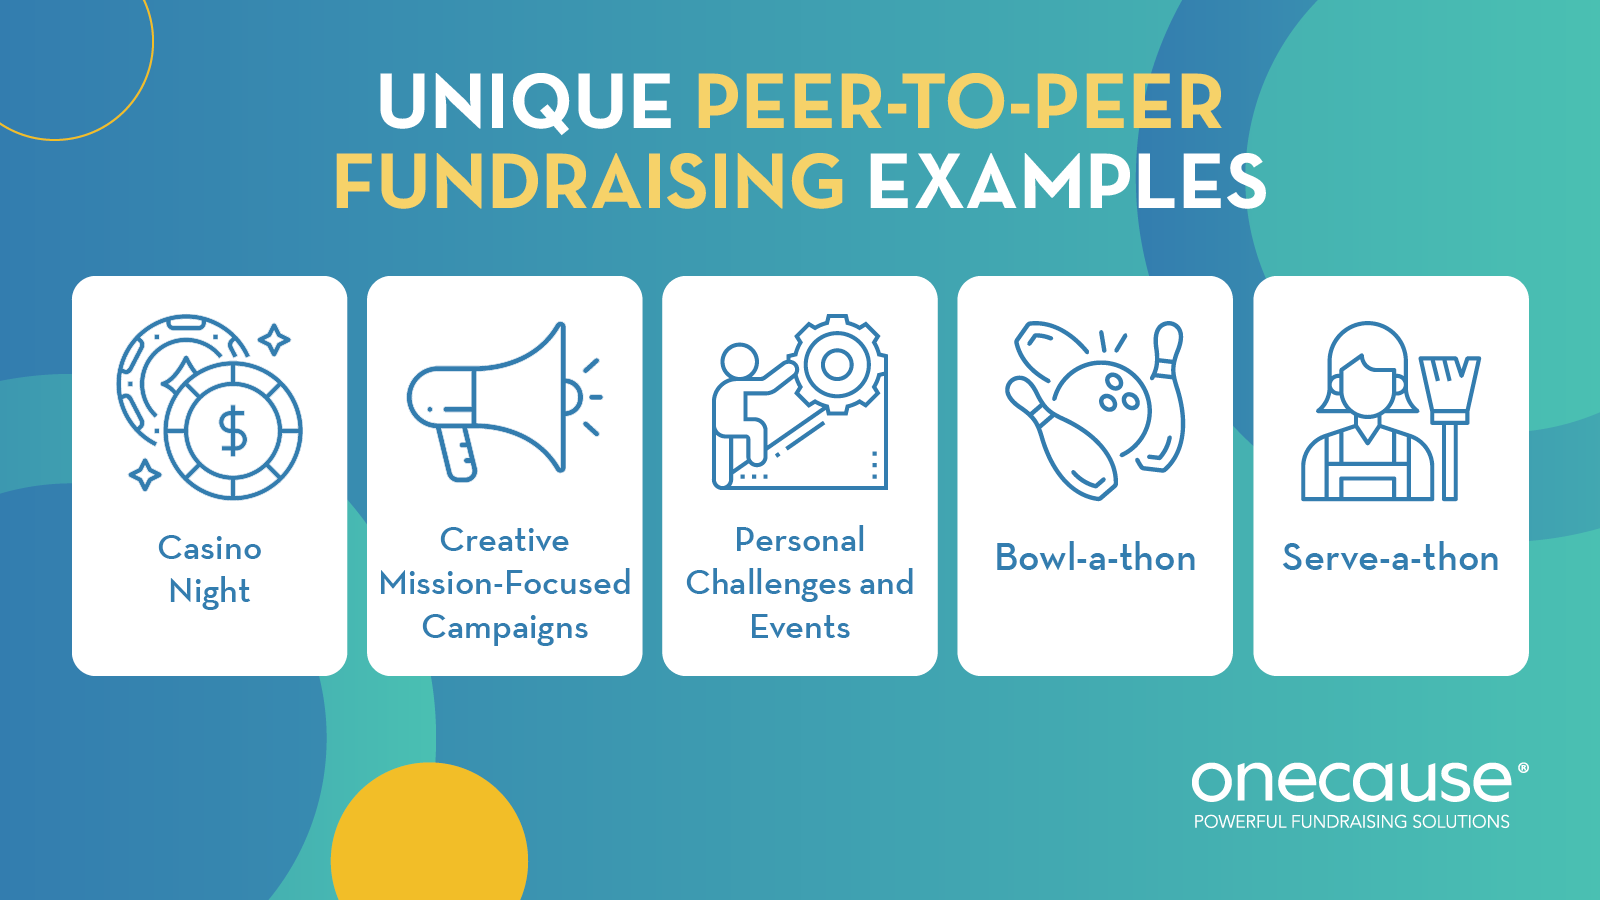 This image lists the most unique peer-to-peer fundraising ideas, also covered in the text below.